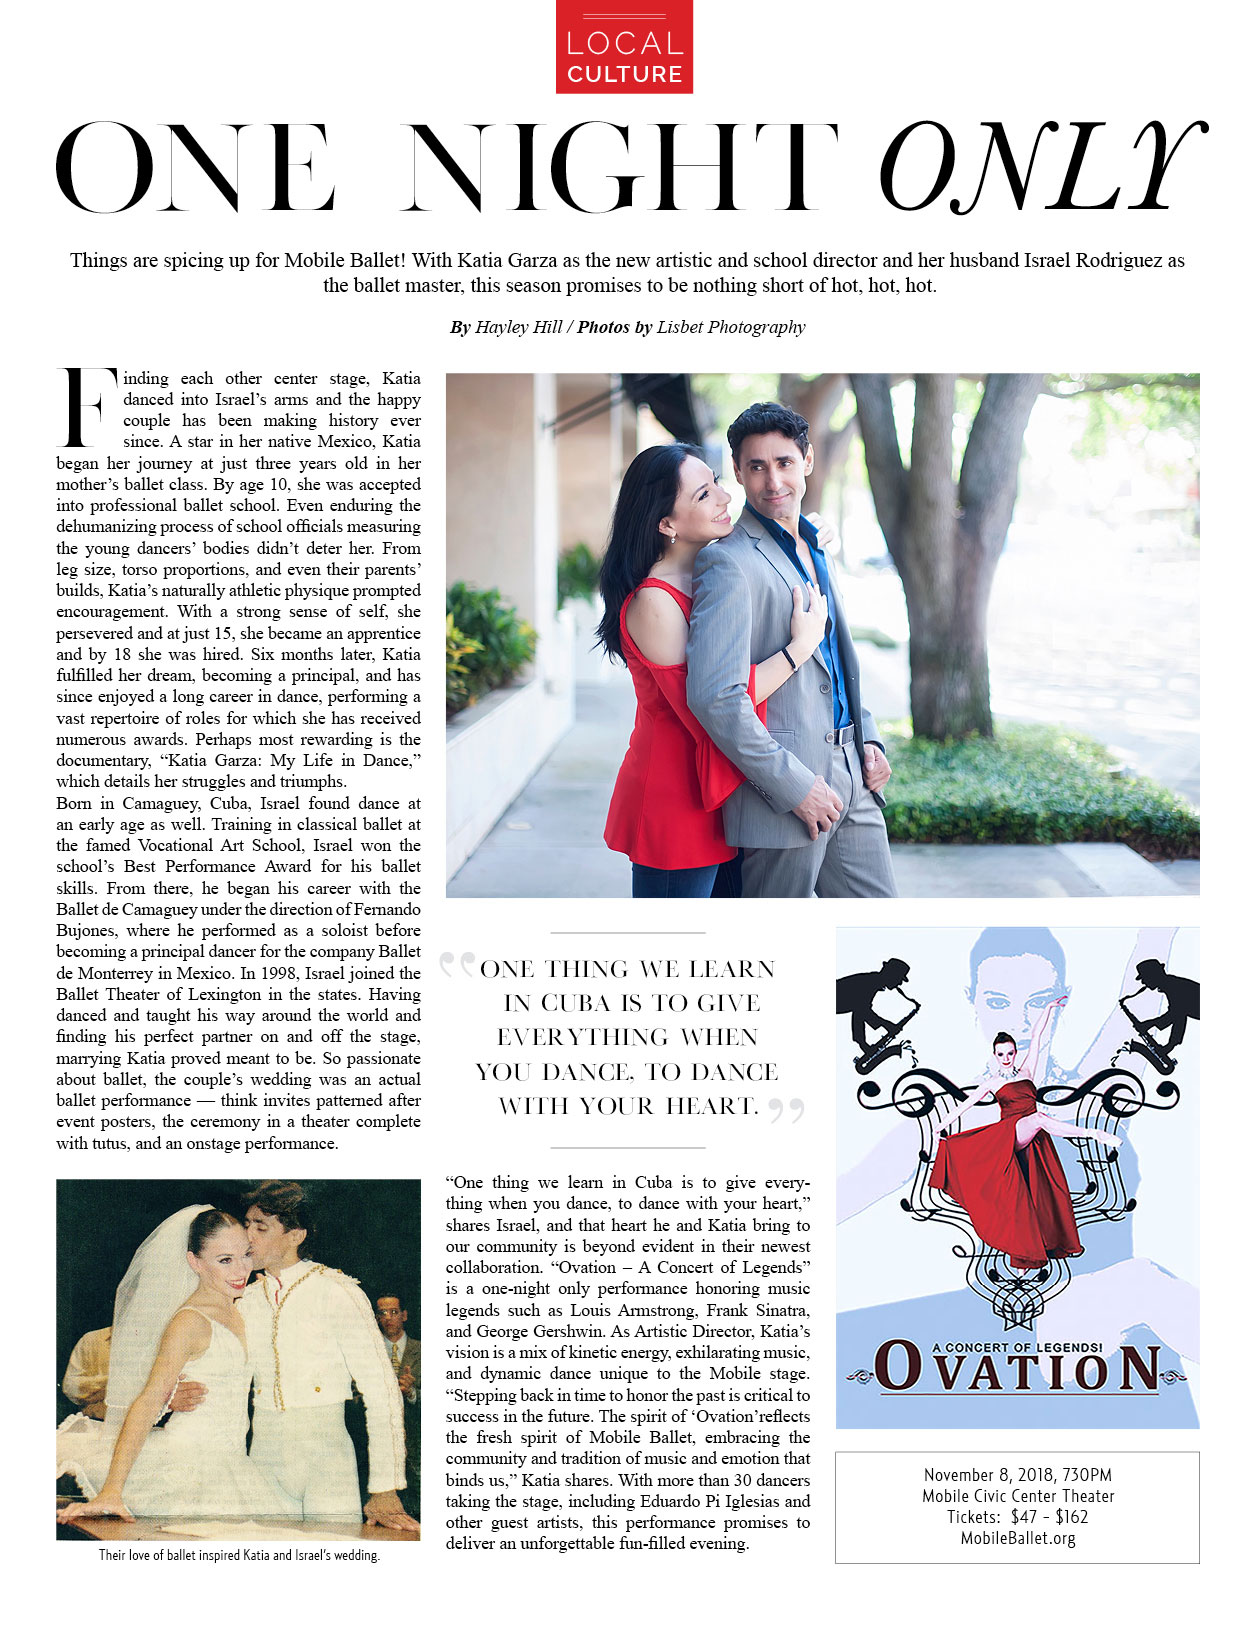 Access Magazine - One Night Only - Mobile Ballet